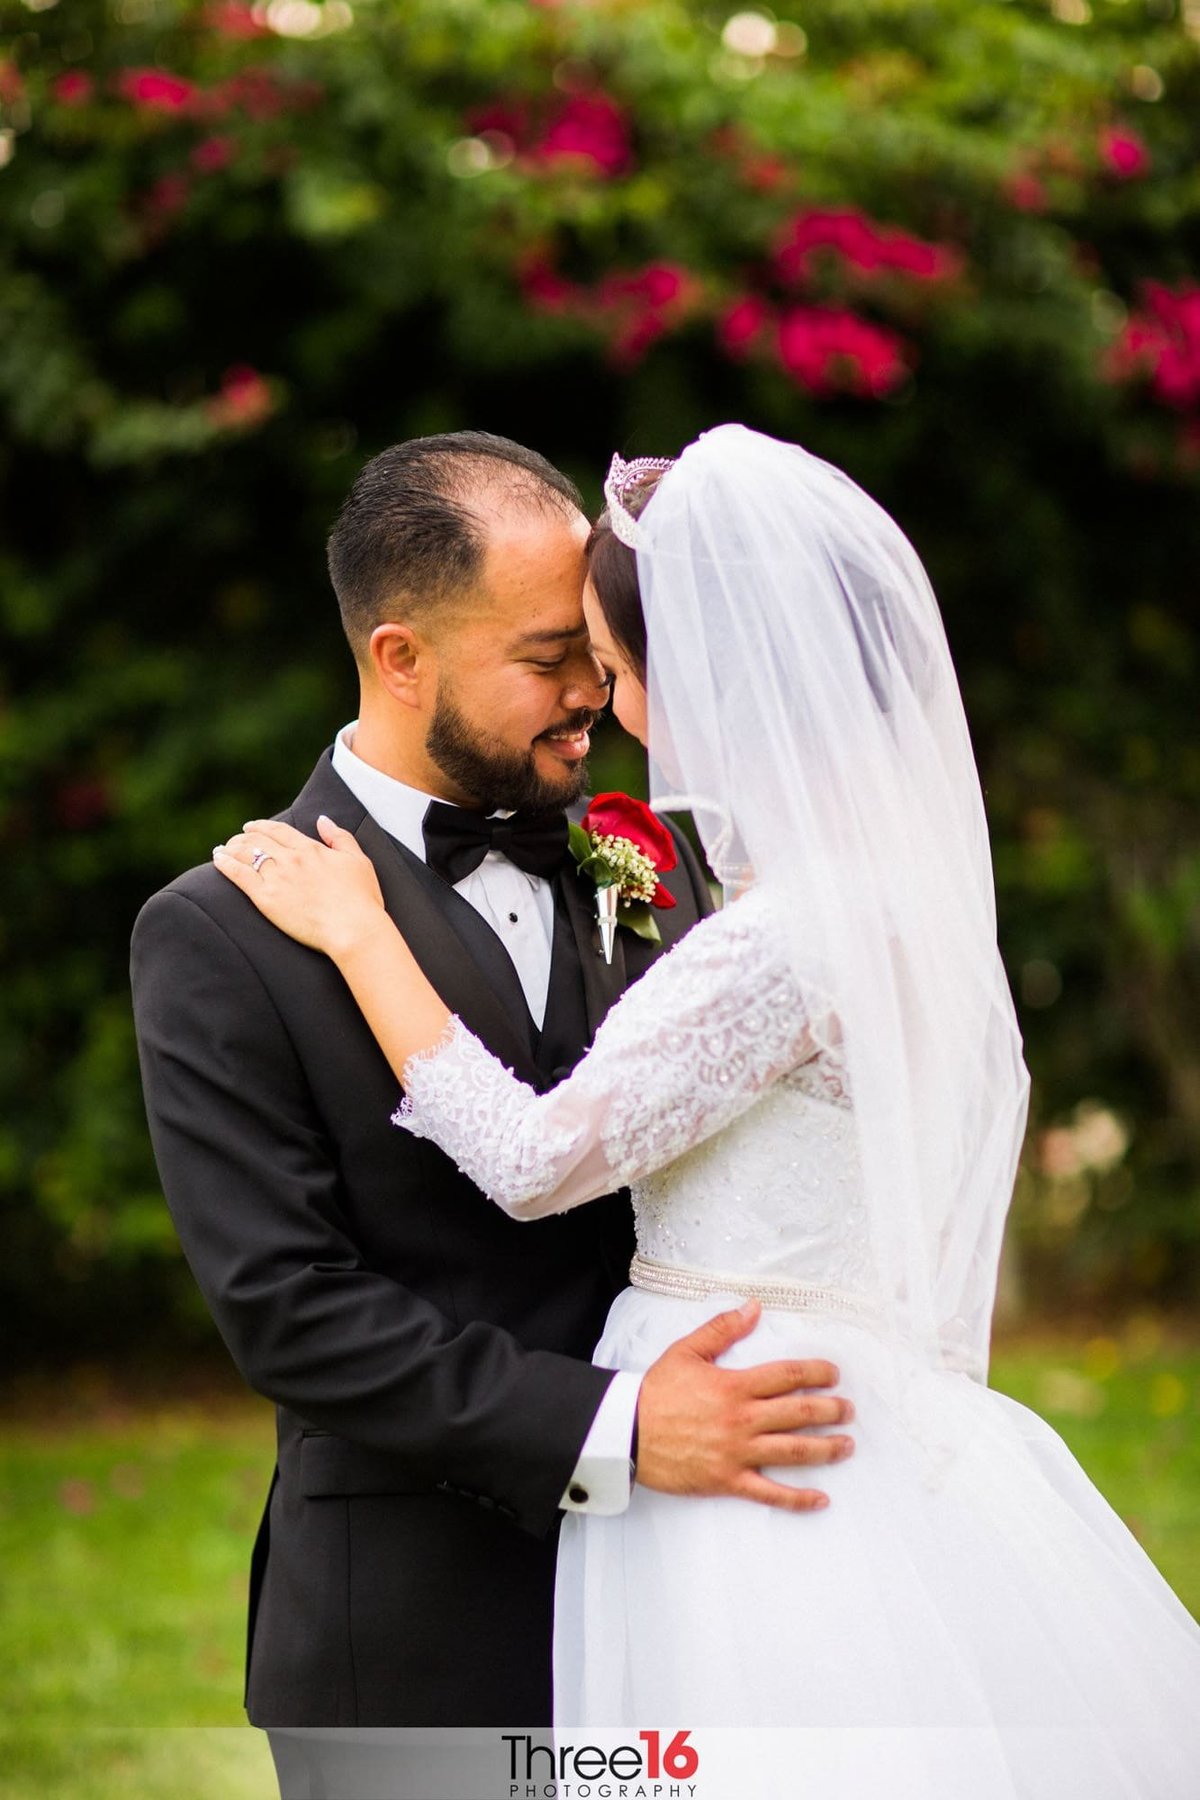 Sweet moment between Bride and Groom with foreheads touching and hands on each other